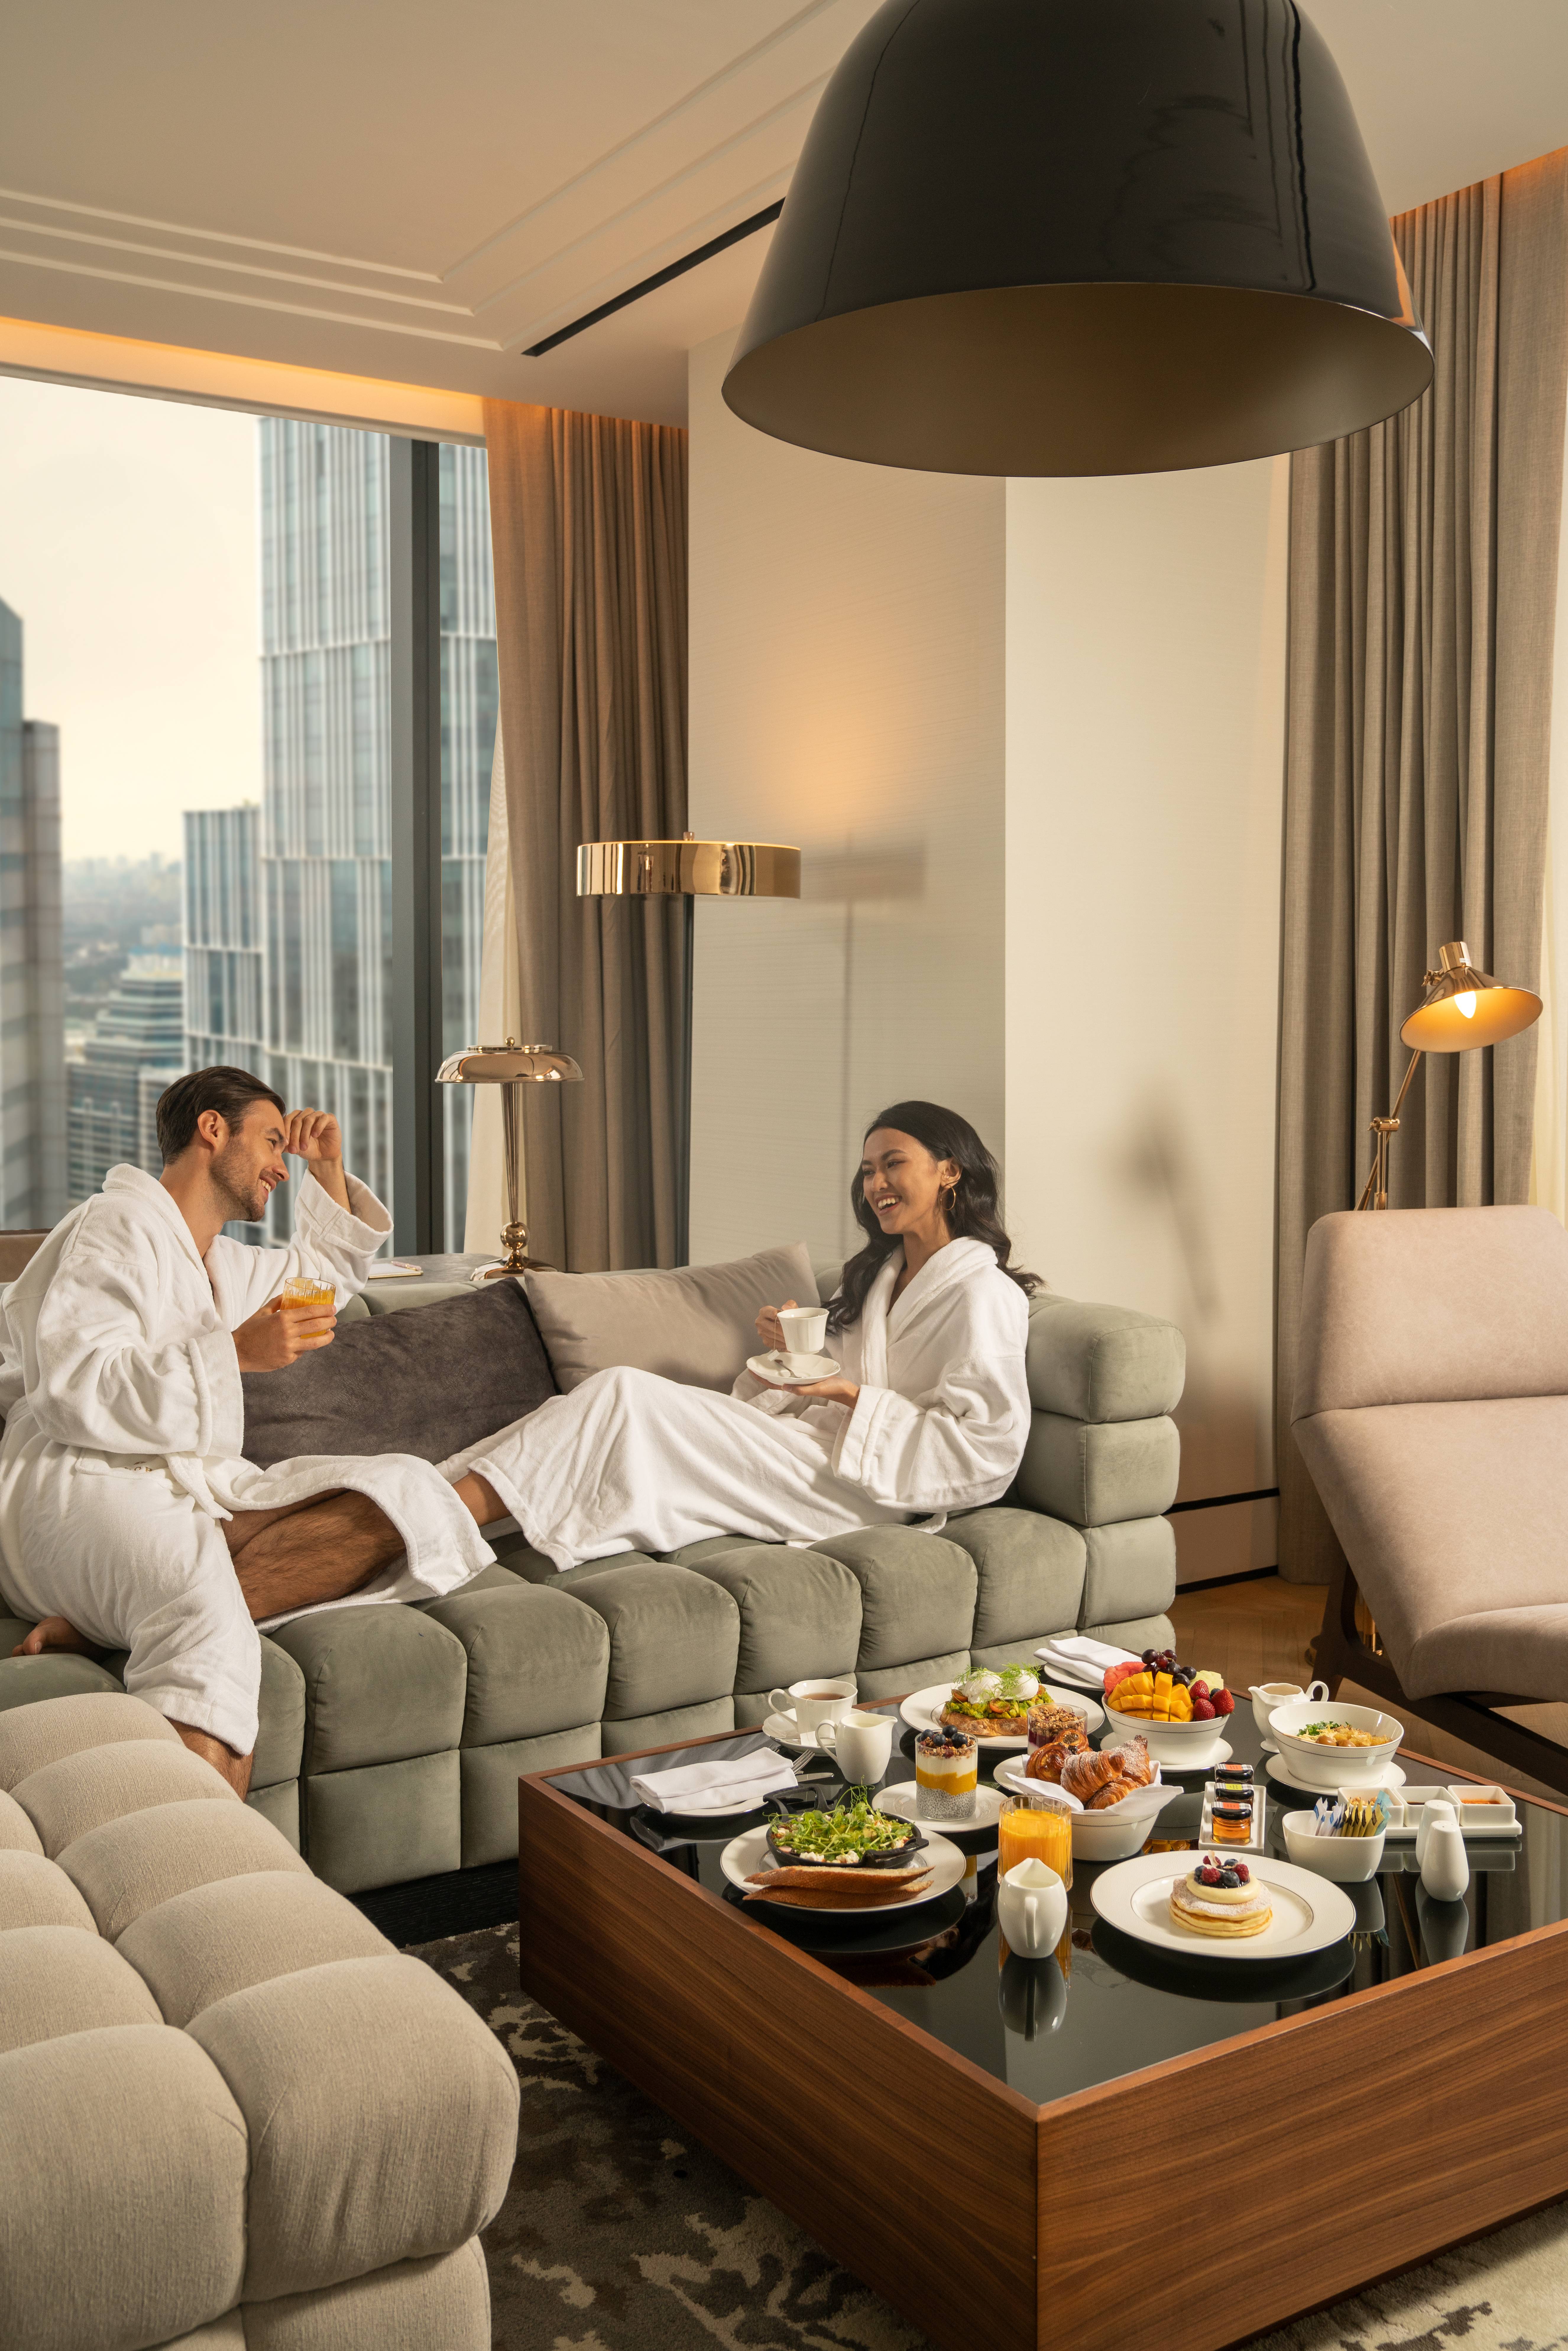 Offers - Enjoy special rate for your upcoming staycation at The Langham, Jakarta by reserving earlier.